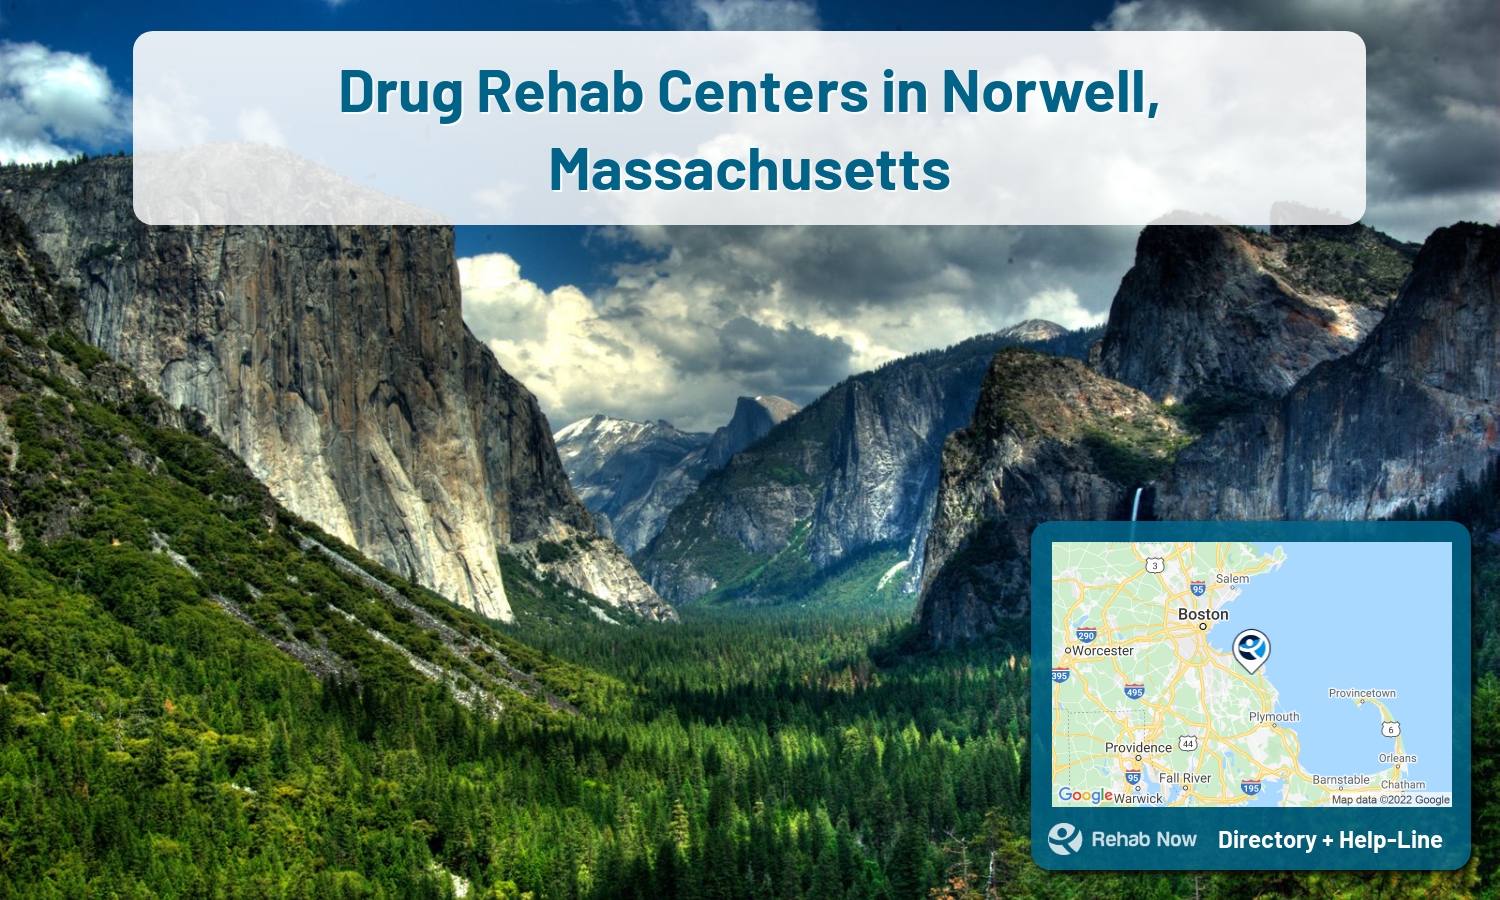 View options, availability, treatment methods, and more, for drug rehab and alcohol treatment in Norwell, Massachusetts